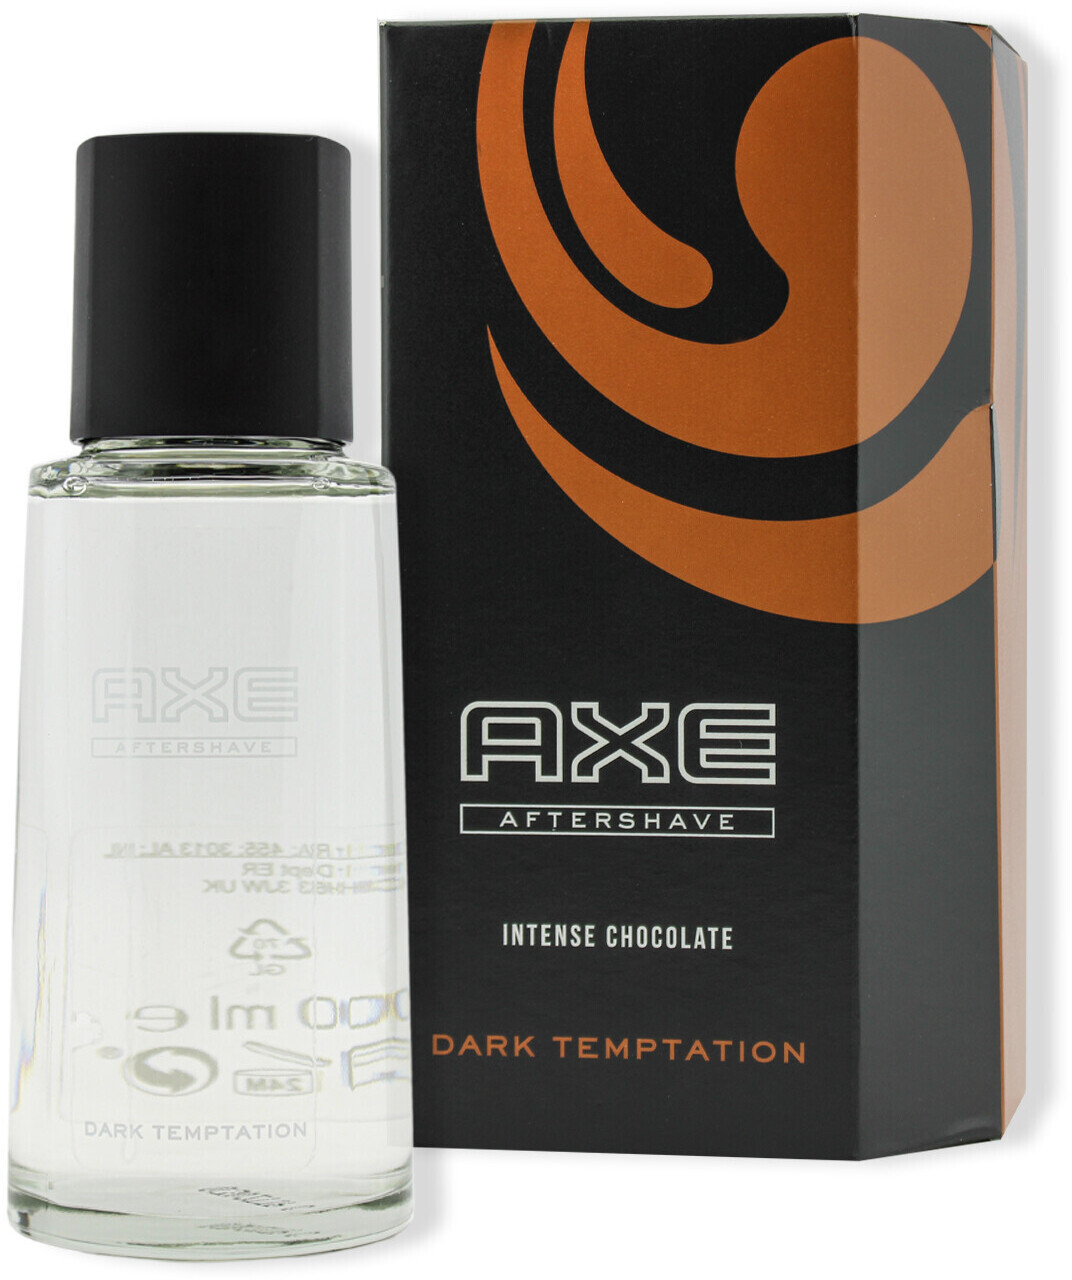 Buy Dark Temptation Intense Chocolate After Shave (100ml) from £3.76 (Today) – Best Deals idealo.co.uk